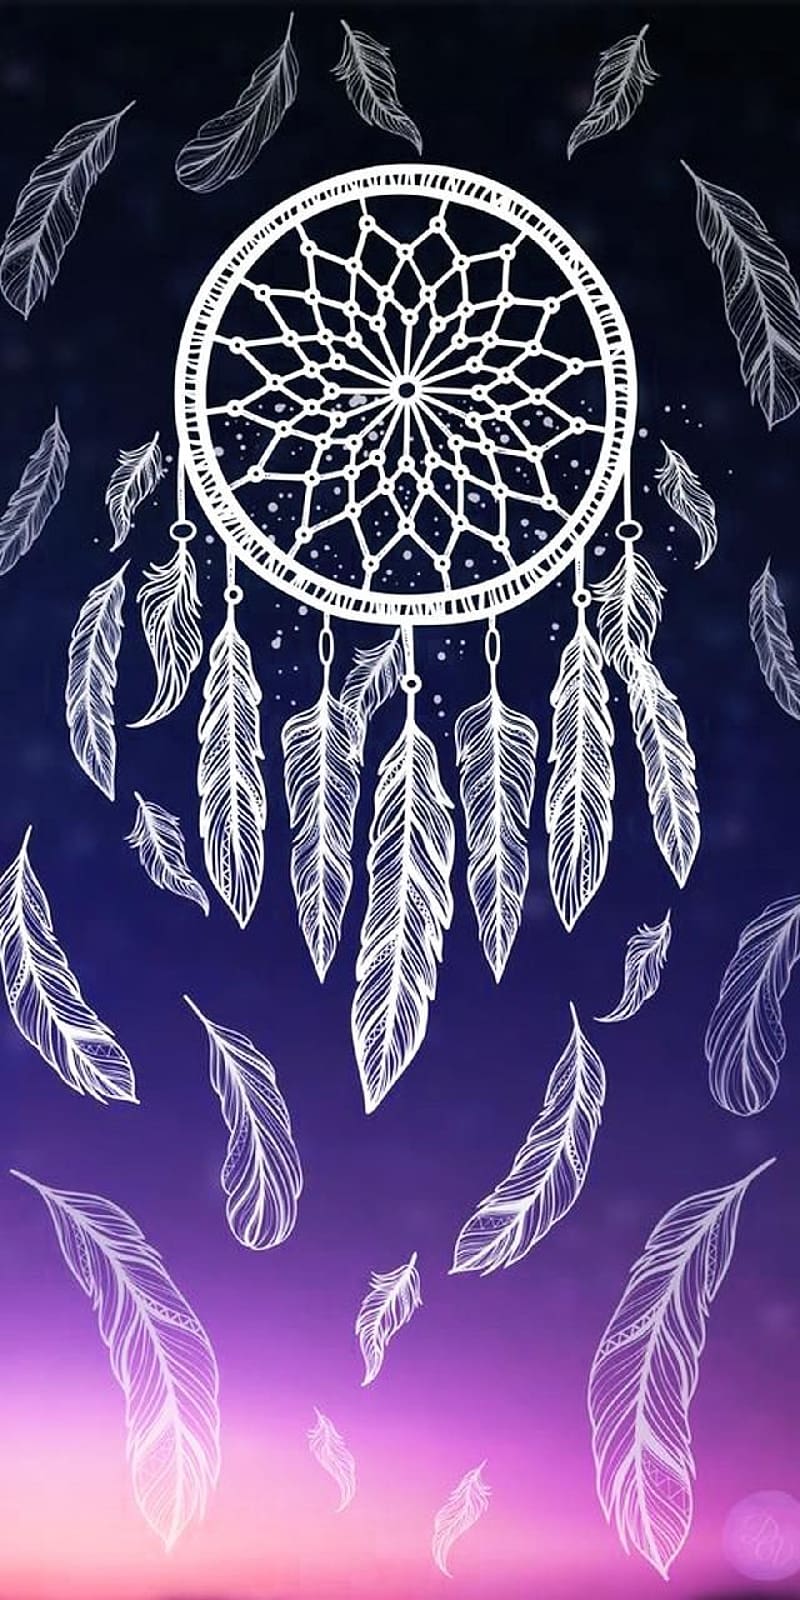 Wallpaper phone, purple and blue background, white drawing of a dream catcher, feathers - Feathers